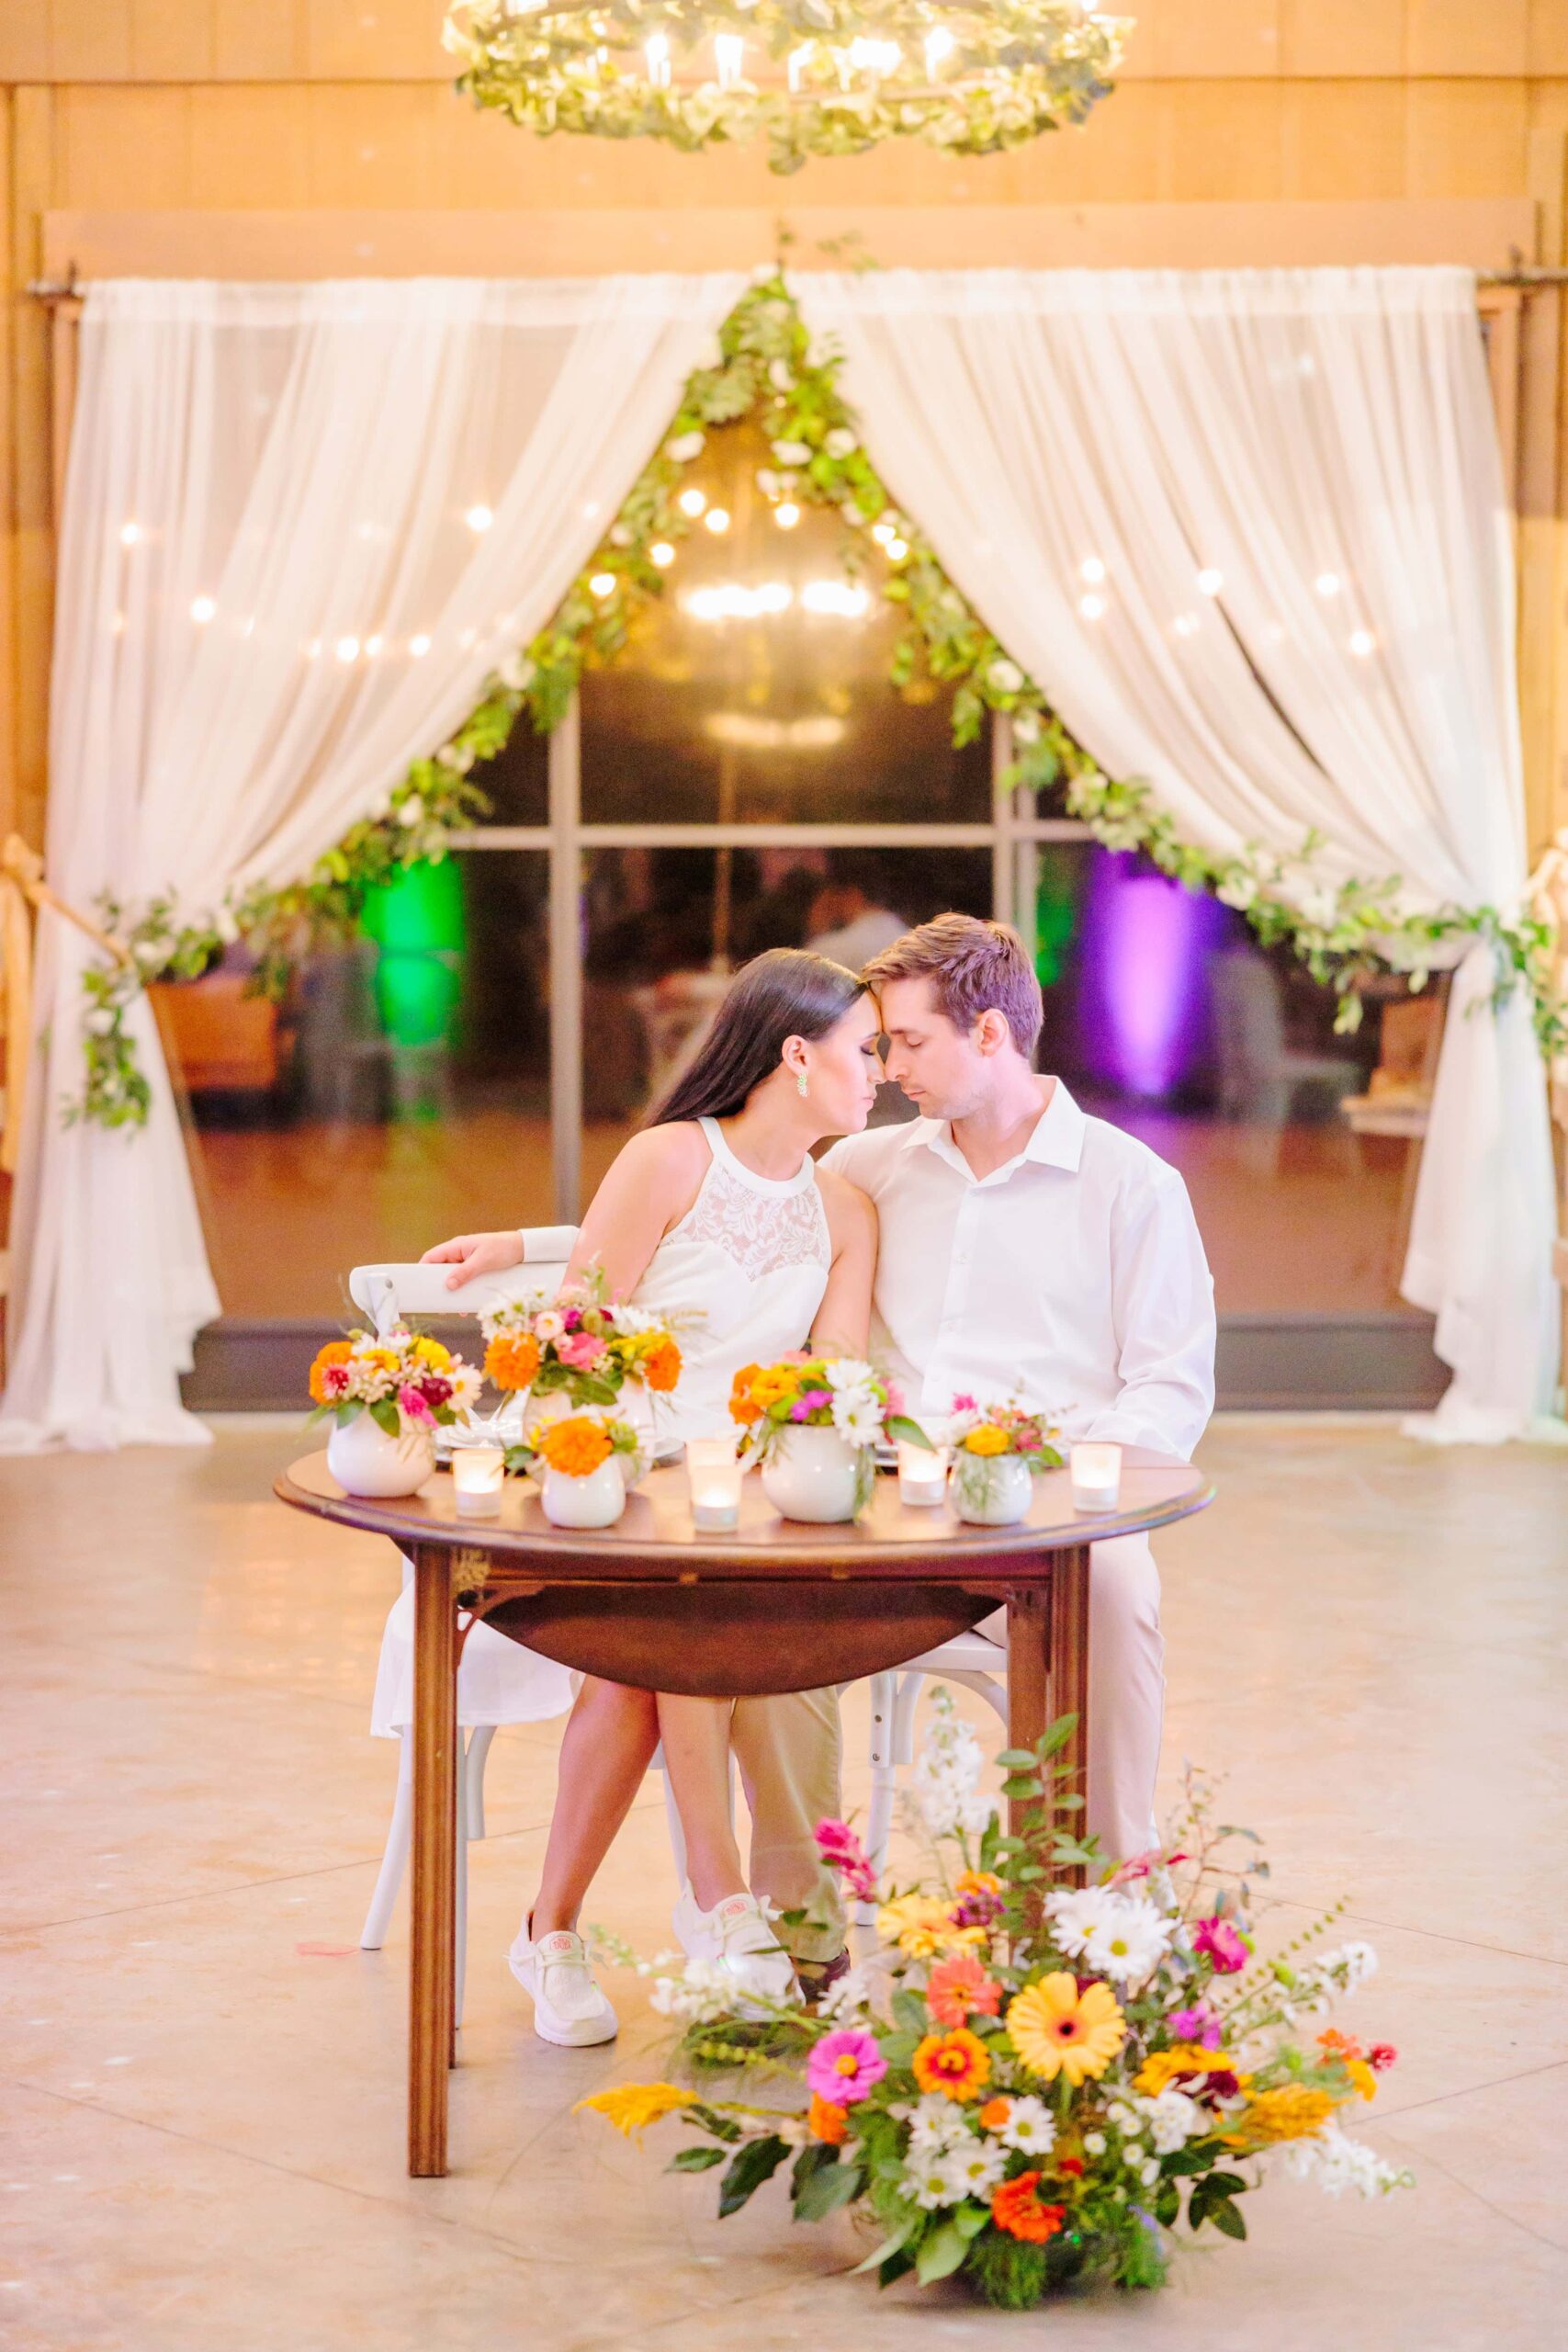 The bride and groom sit down at a disco themed sweetheart table surrounded by florals at their wedding.